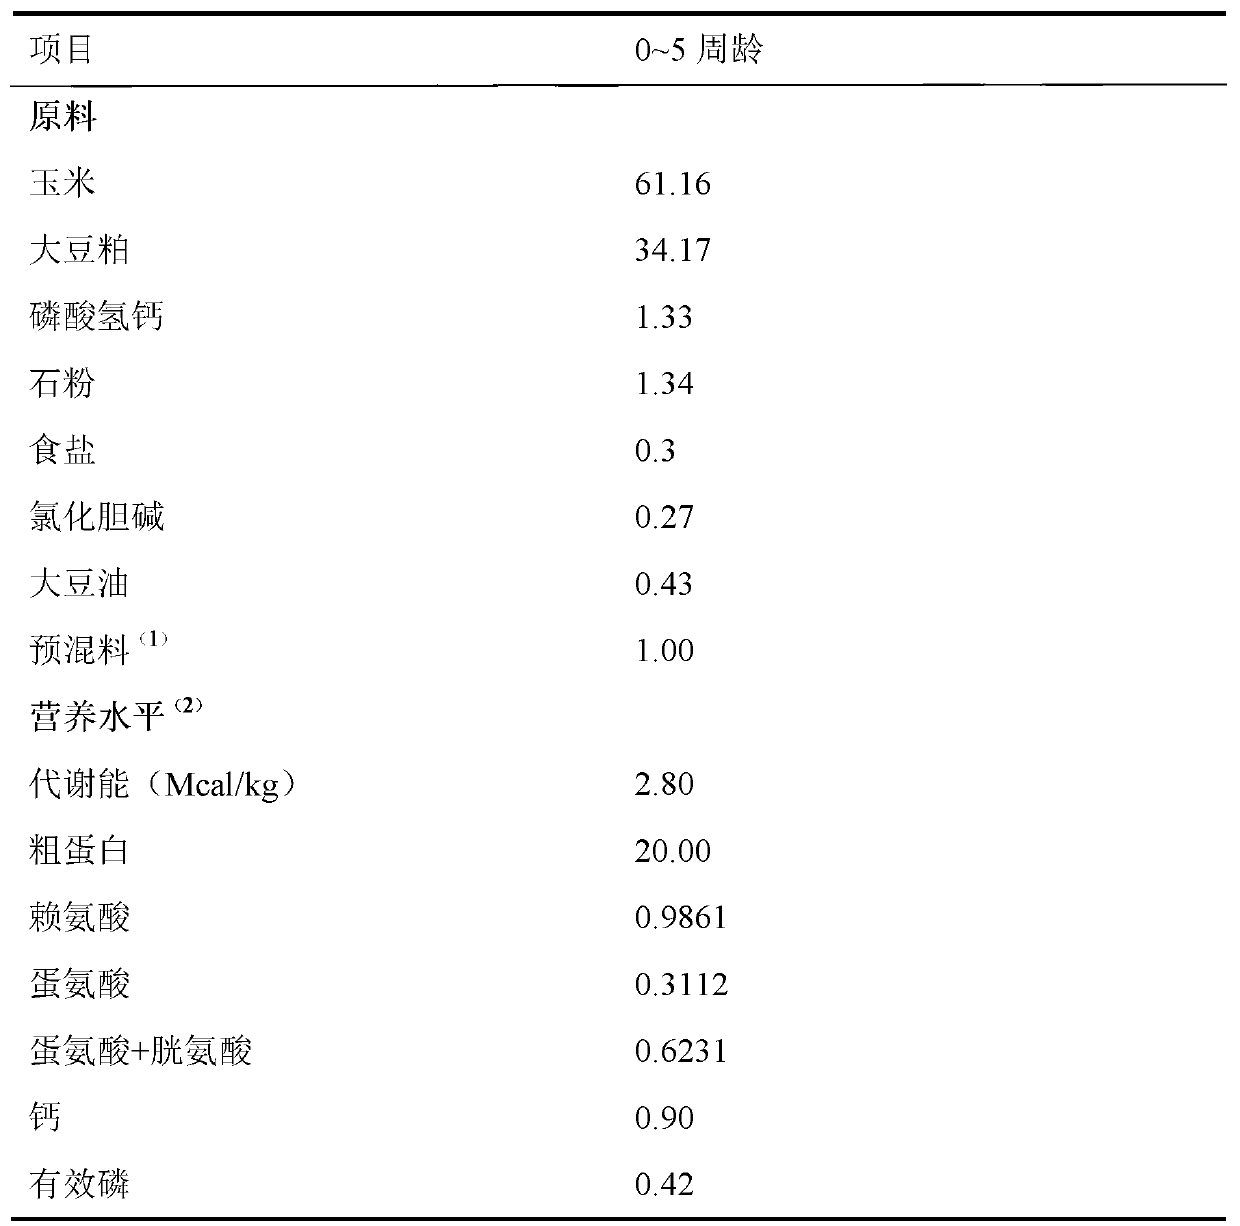 Bacillus mucilaginosus and preparation method of crude polysaccharide of bacillus mucilaginosus beneficial to growth of poultry